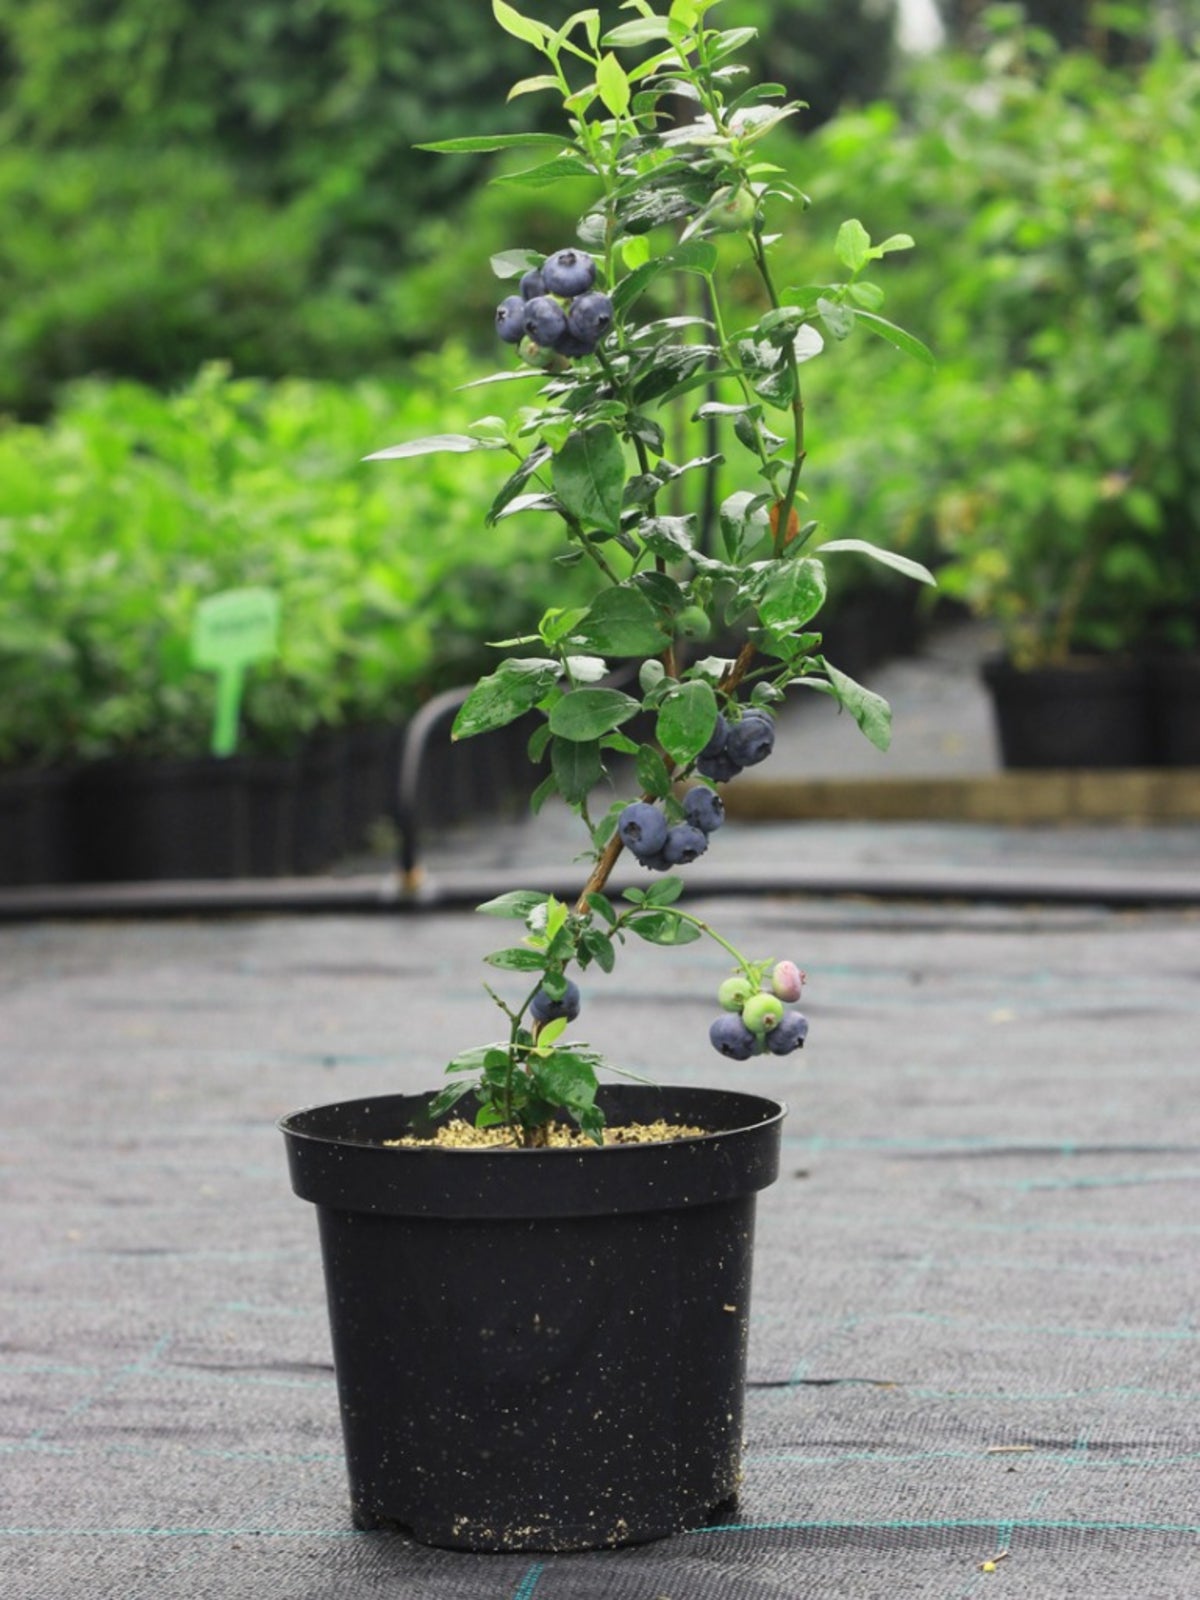 How To Grow Blueberry Bushes